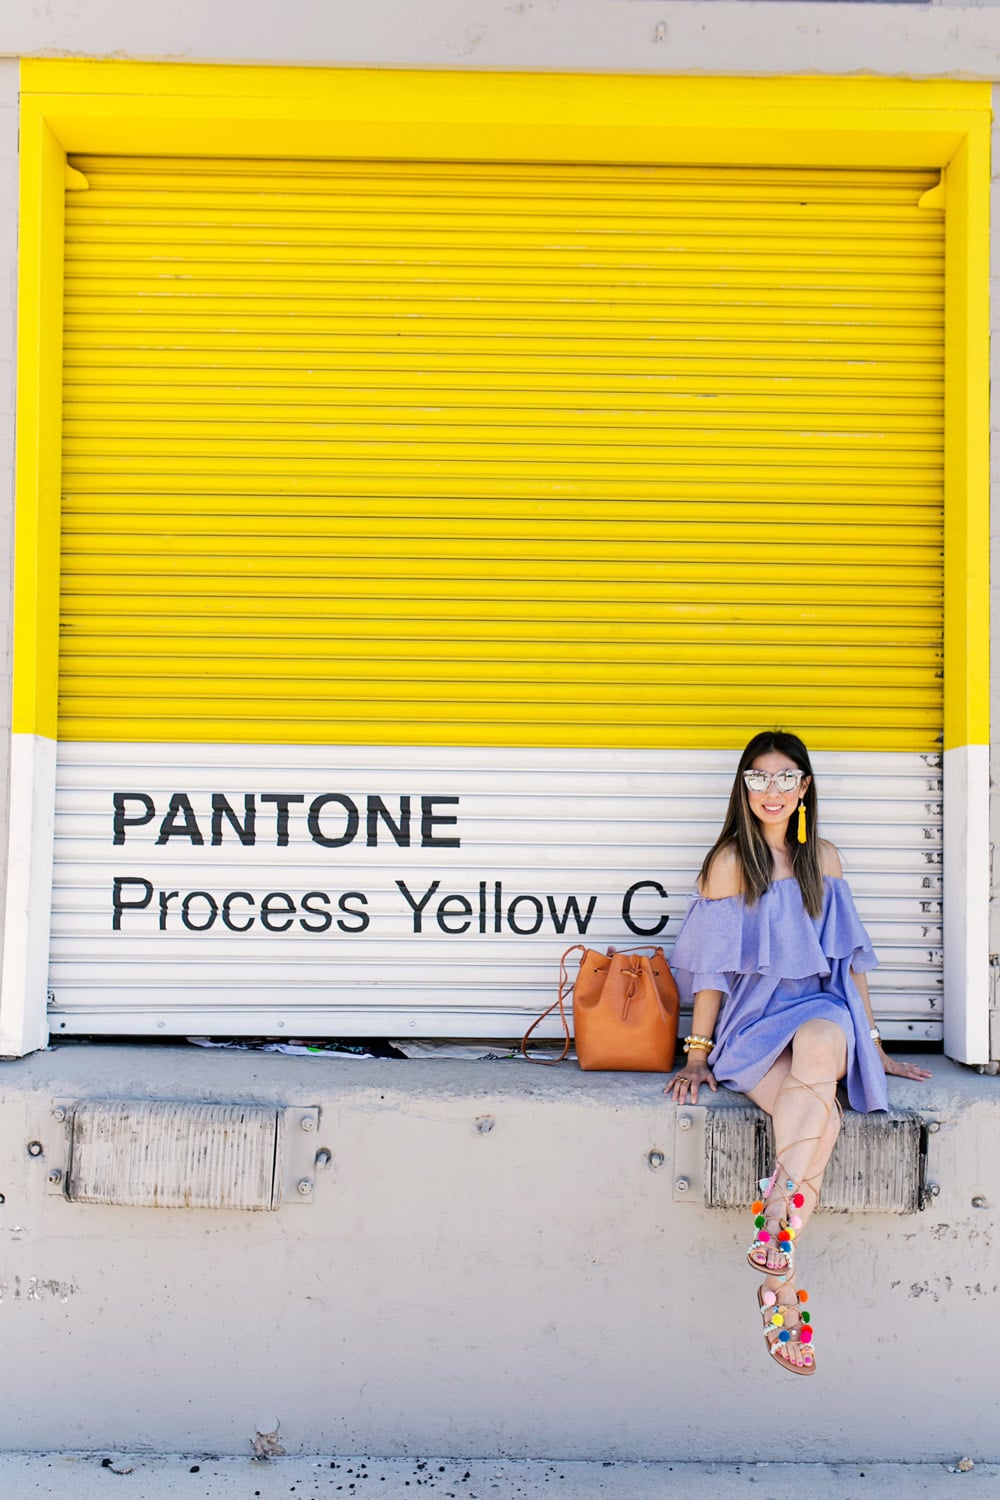 off the shoulder dress with pom pom sandals in front of yellow wall